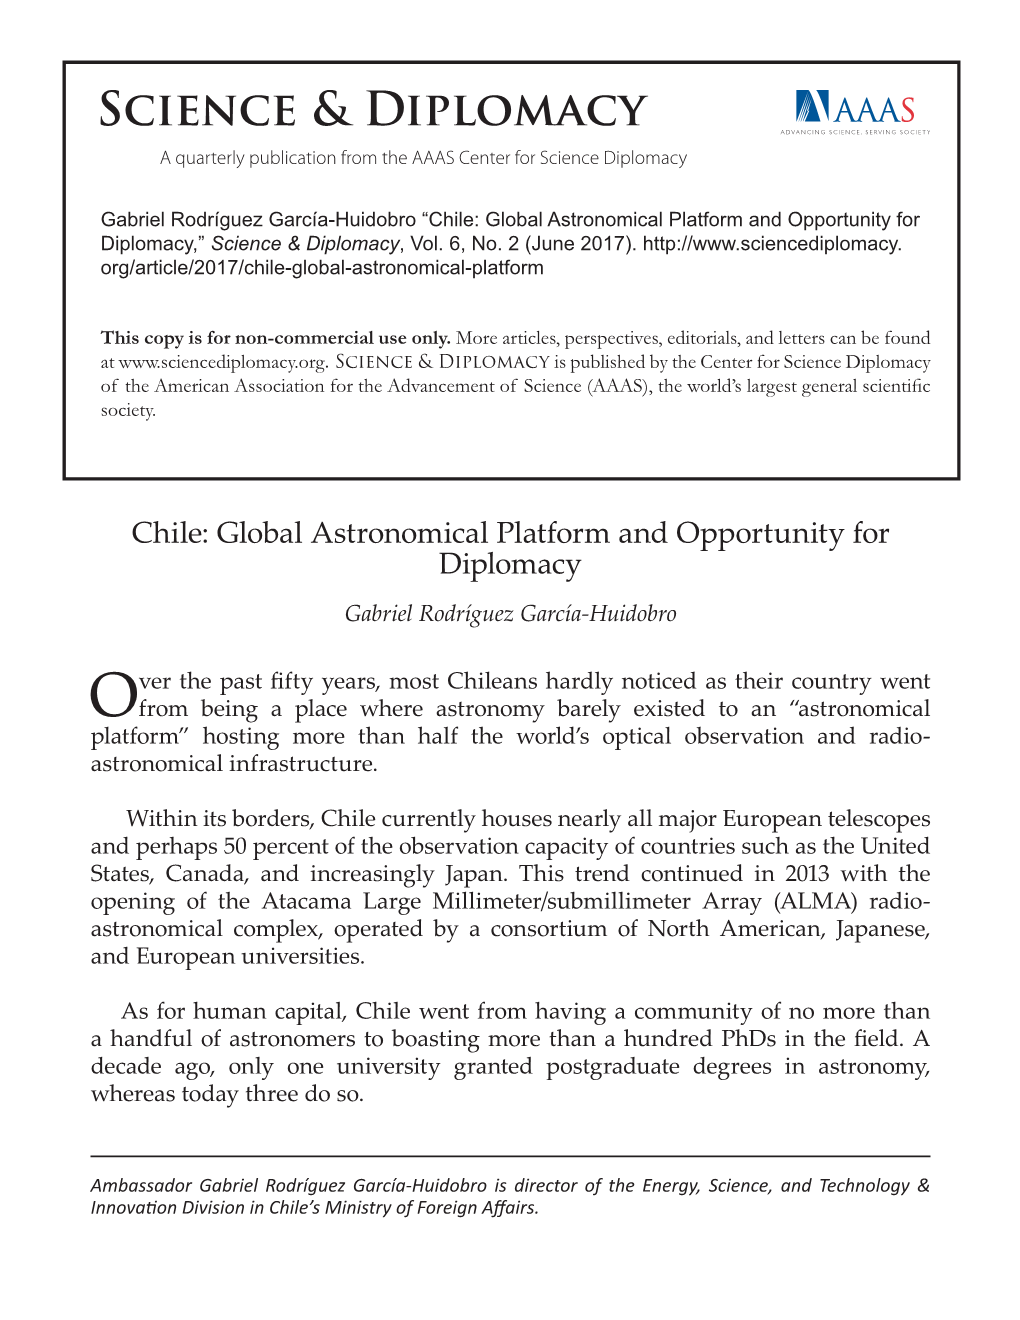 Chile: Global Astronomical Platform and Opportunity for Diplomacy,” Science & Diplomacy, Vol